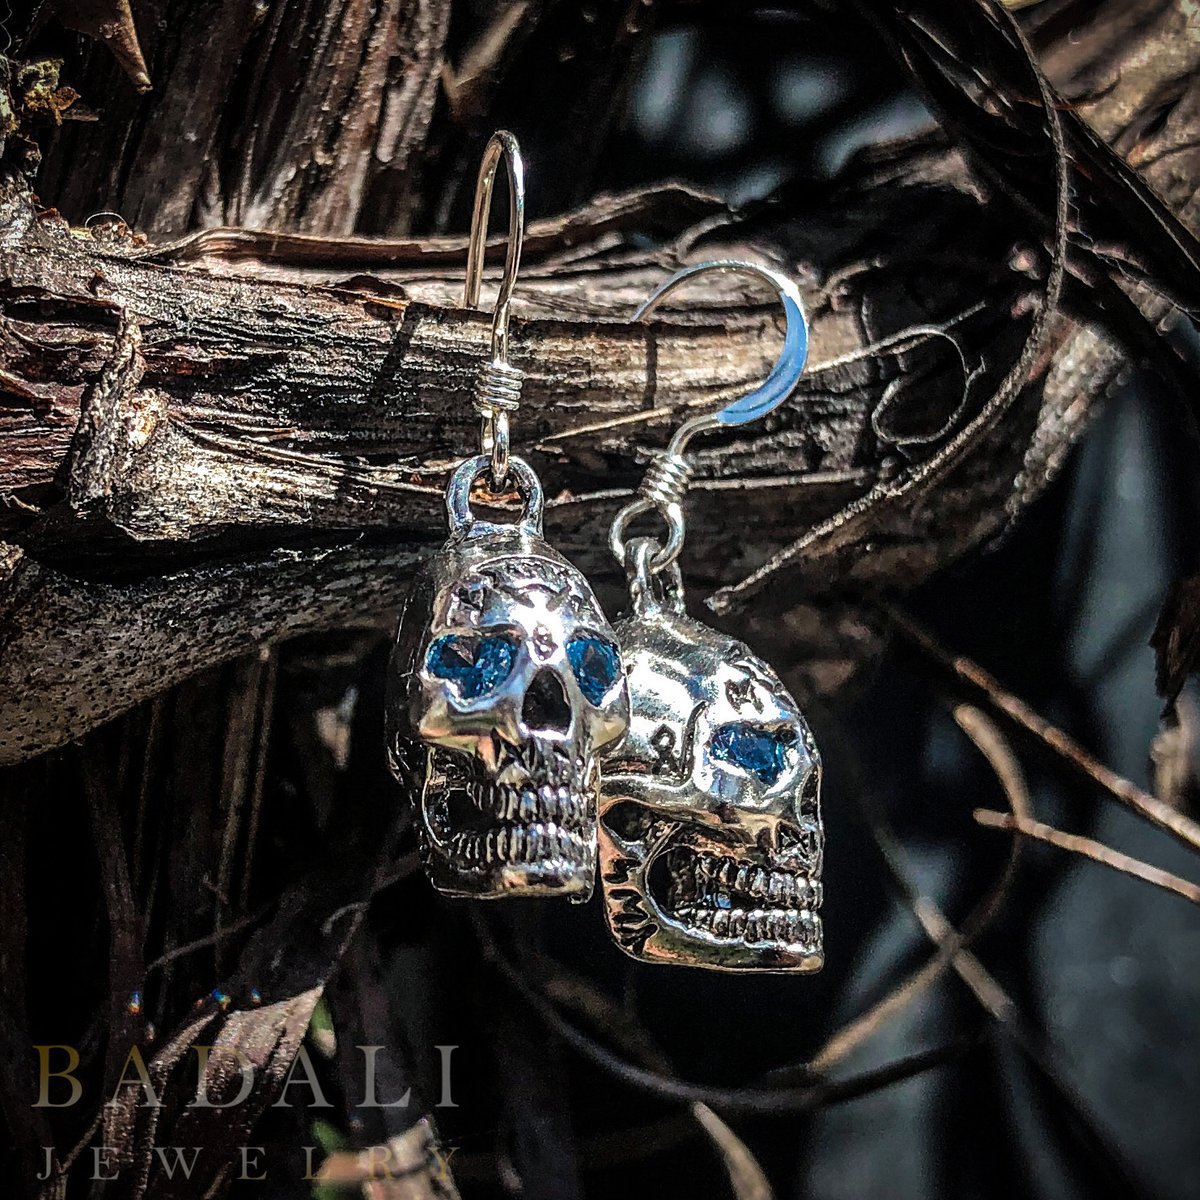 Our Official Bob the Skull necklaces and earrings are solid sterling silver and handmade at our little shop in Utah! badalijewelry.com/collections/dr… @LongShotAuthor @PadawanMolly @HarriedWizard #JimButcher #TheDresdenFiles #BobTheSkull